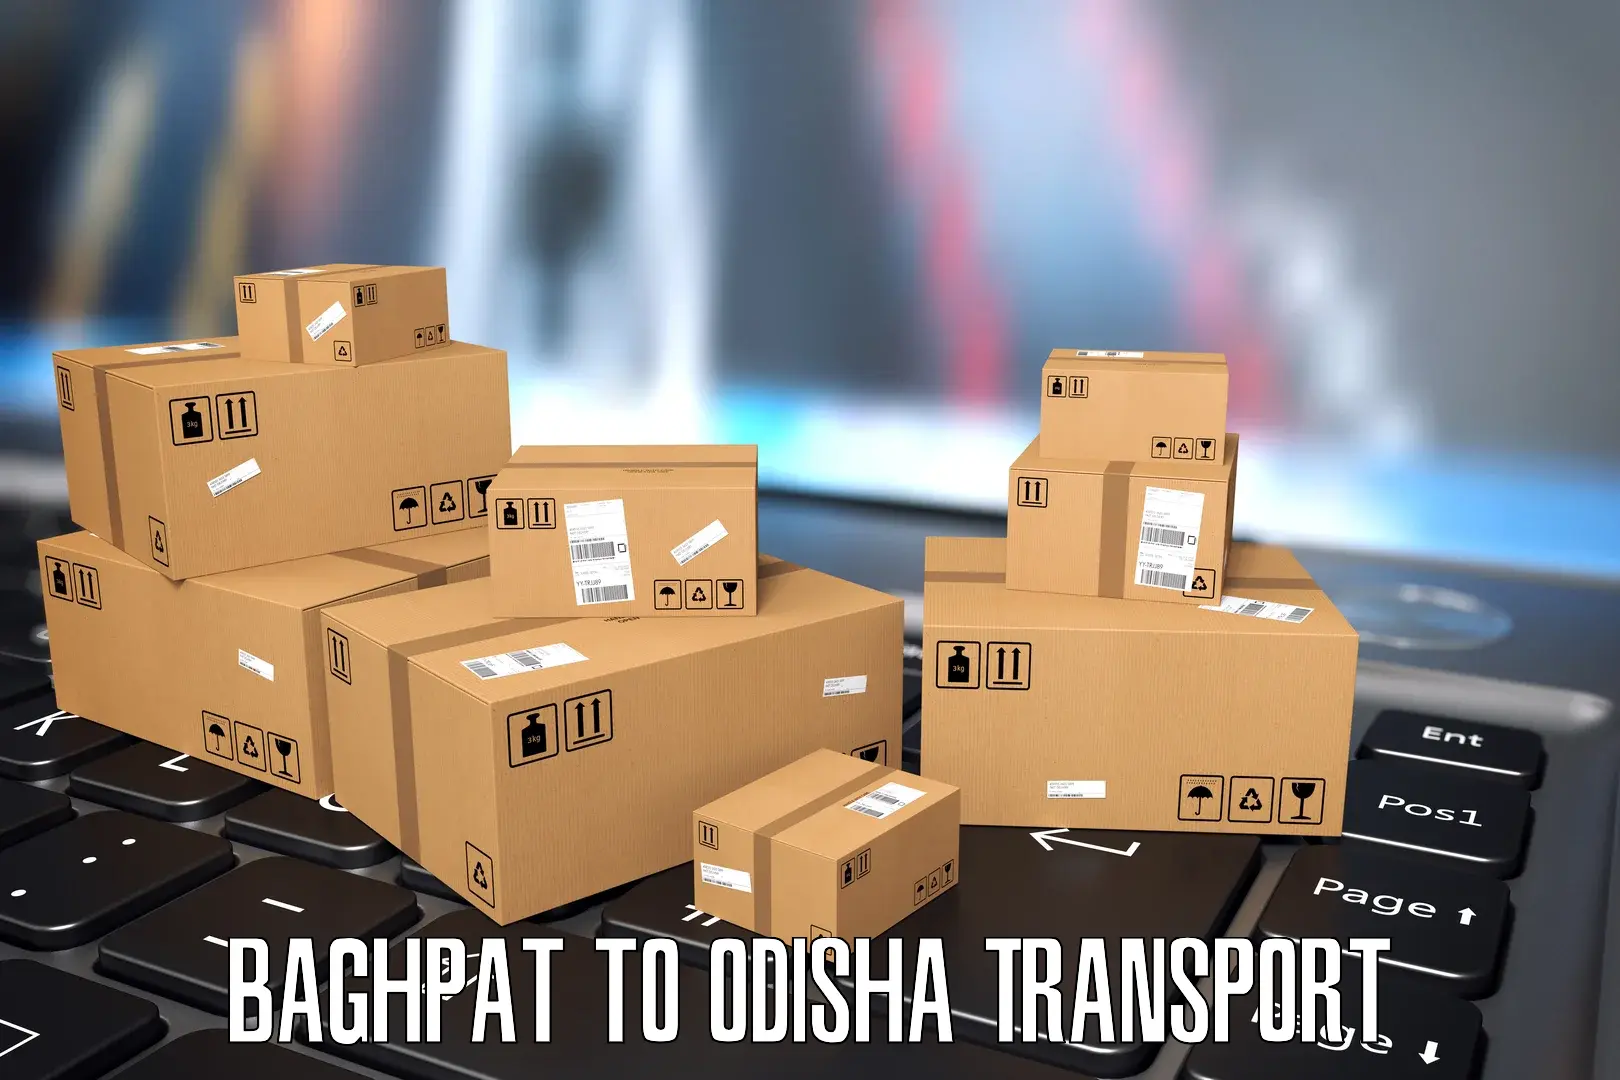 Lorry transport service Baghpat to Jeypore